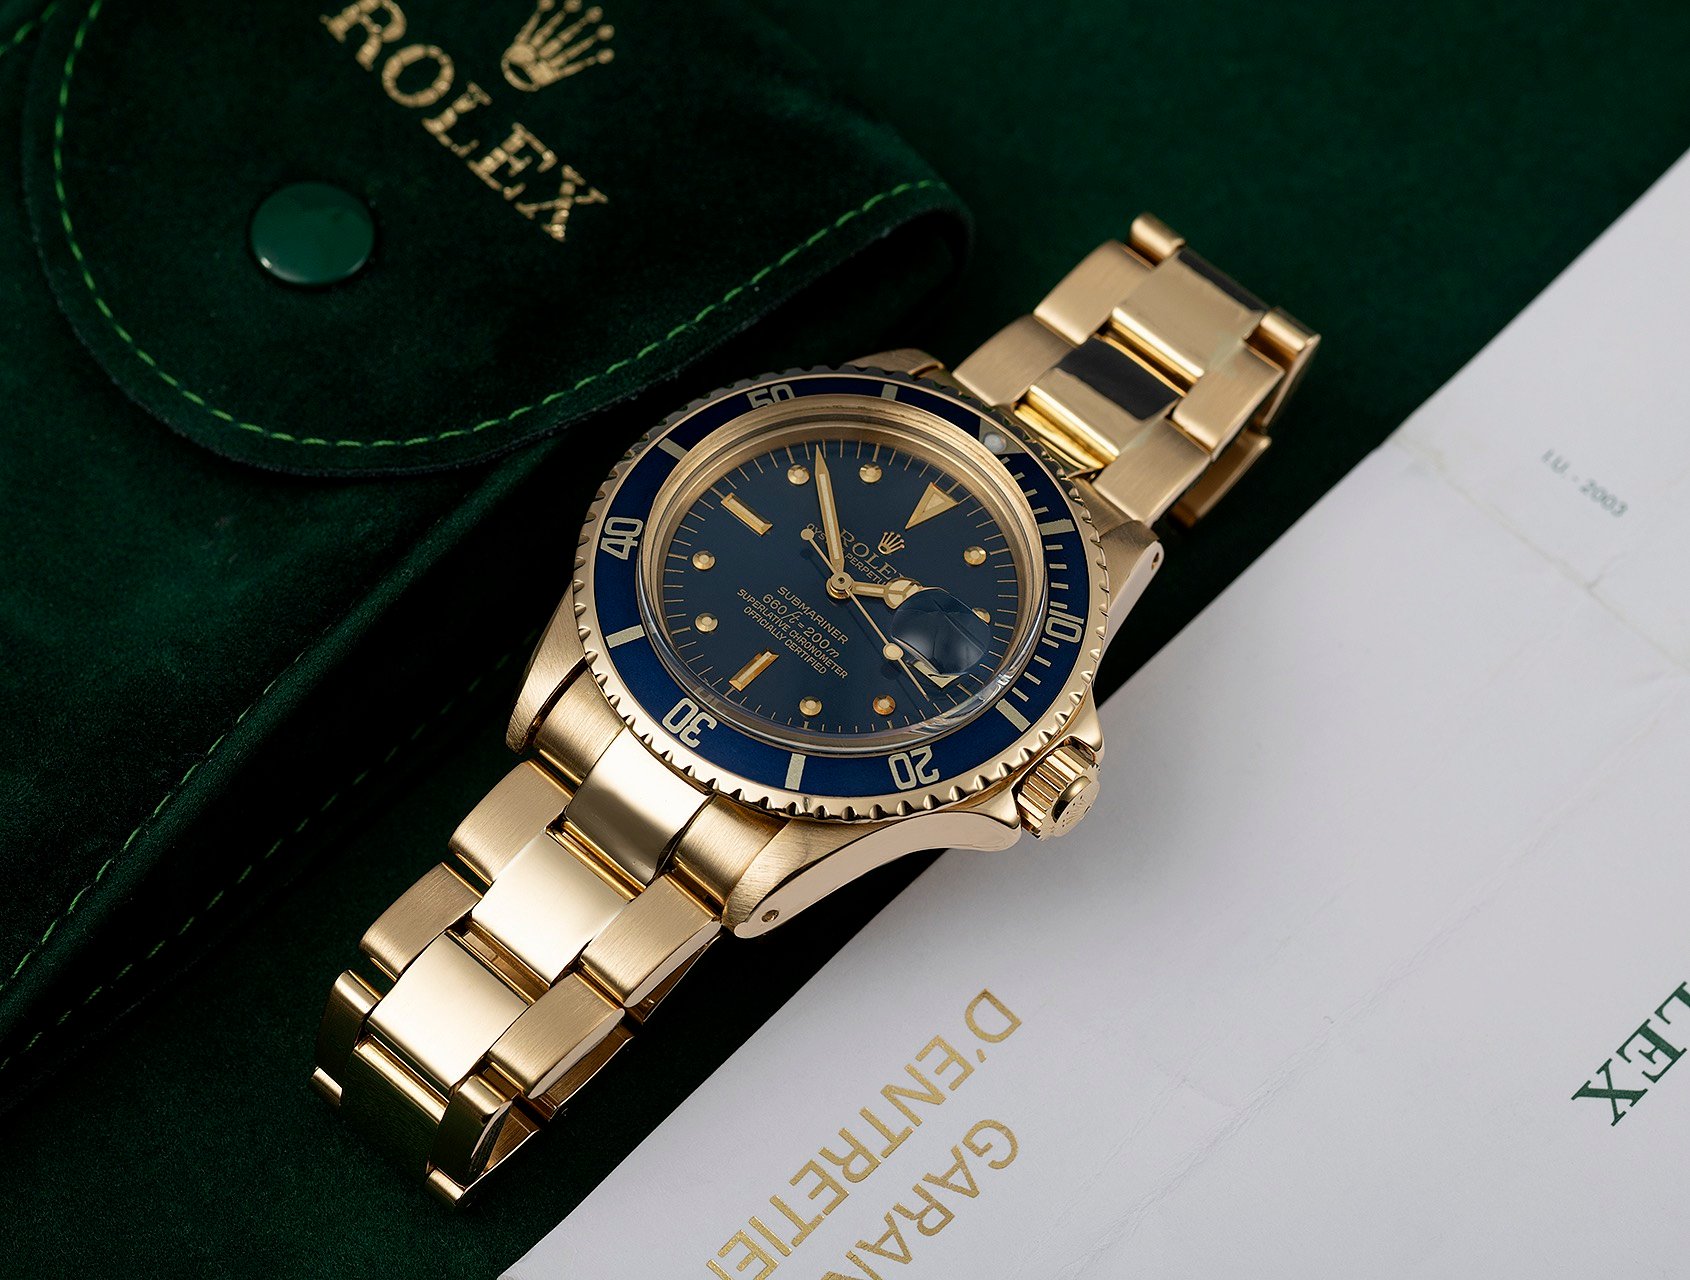 pre-owned full-gold Rolex Submariner ref. 1680/8